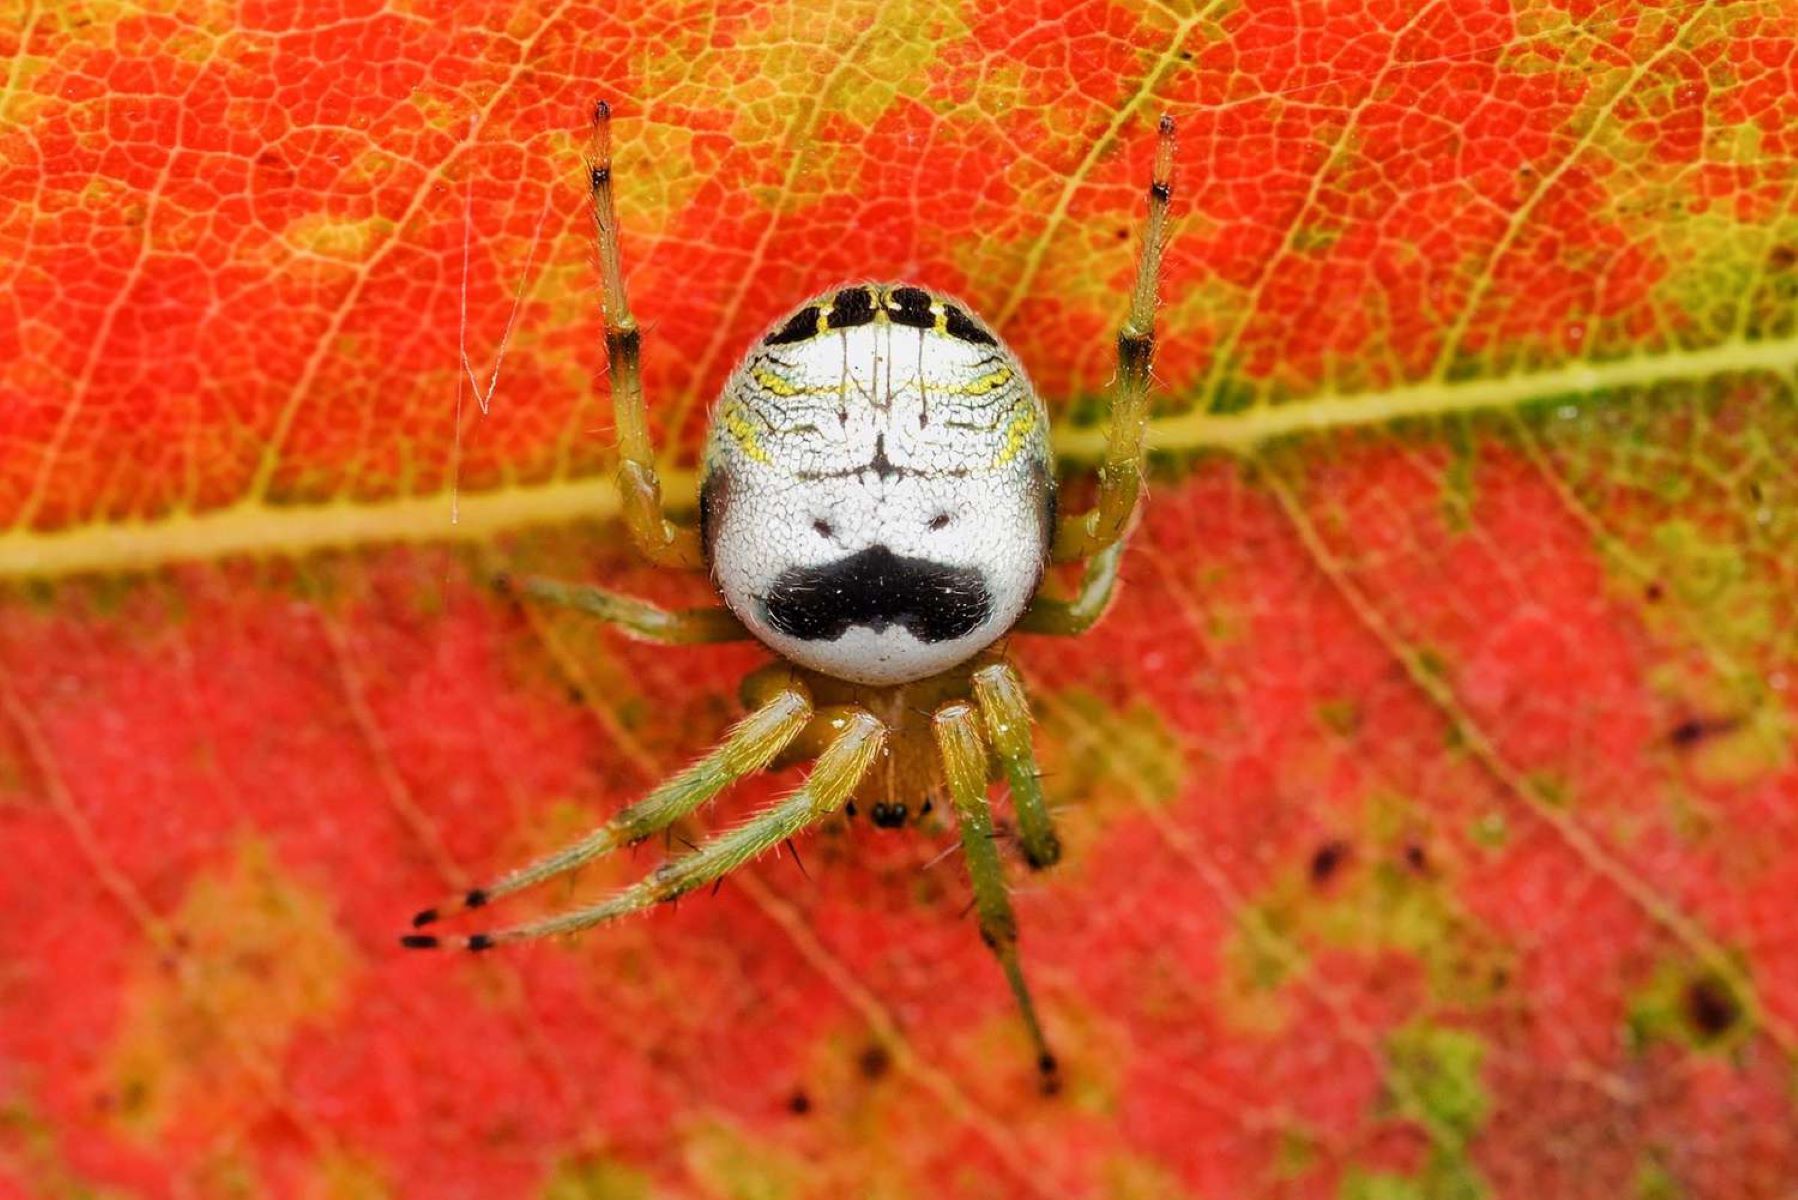 Nature curiosity: Why do spiders have so many eyes?